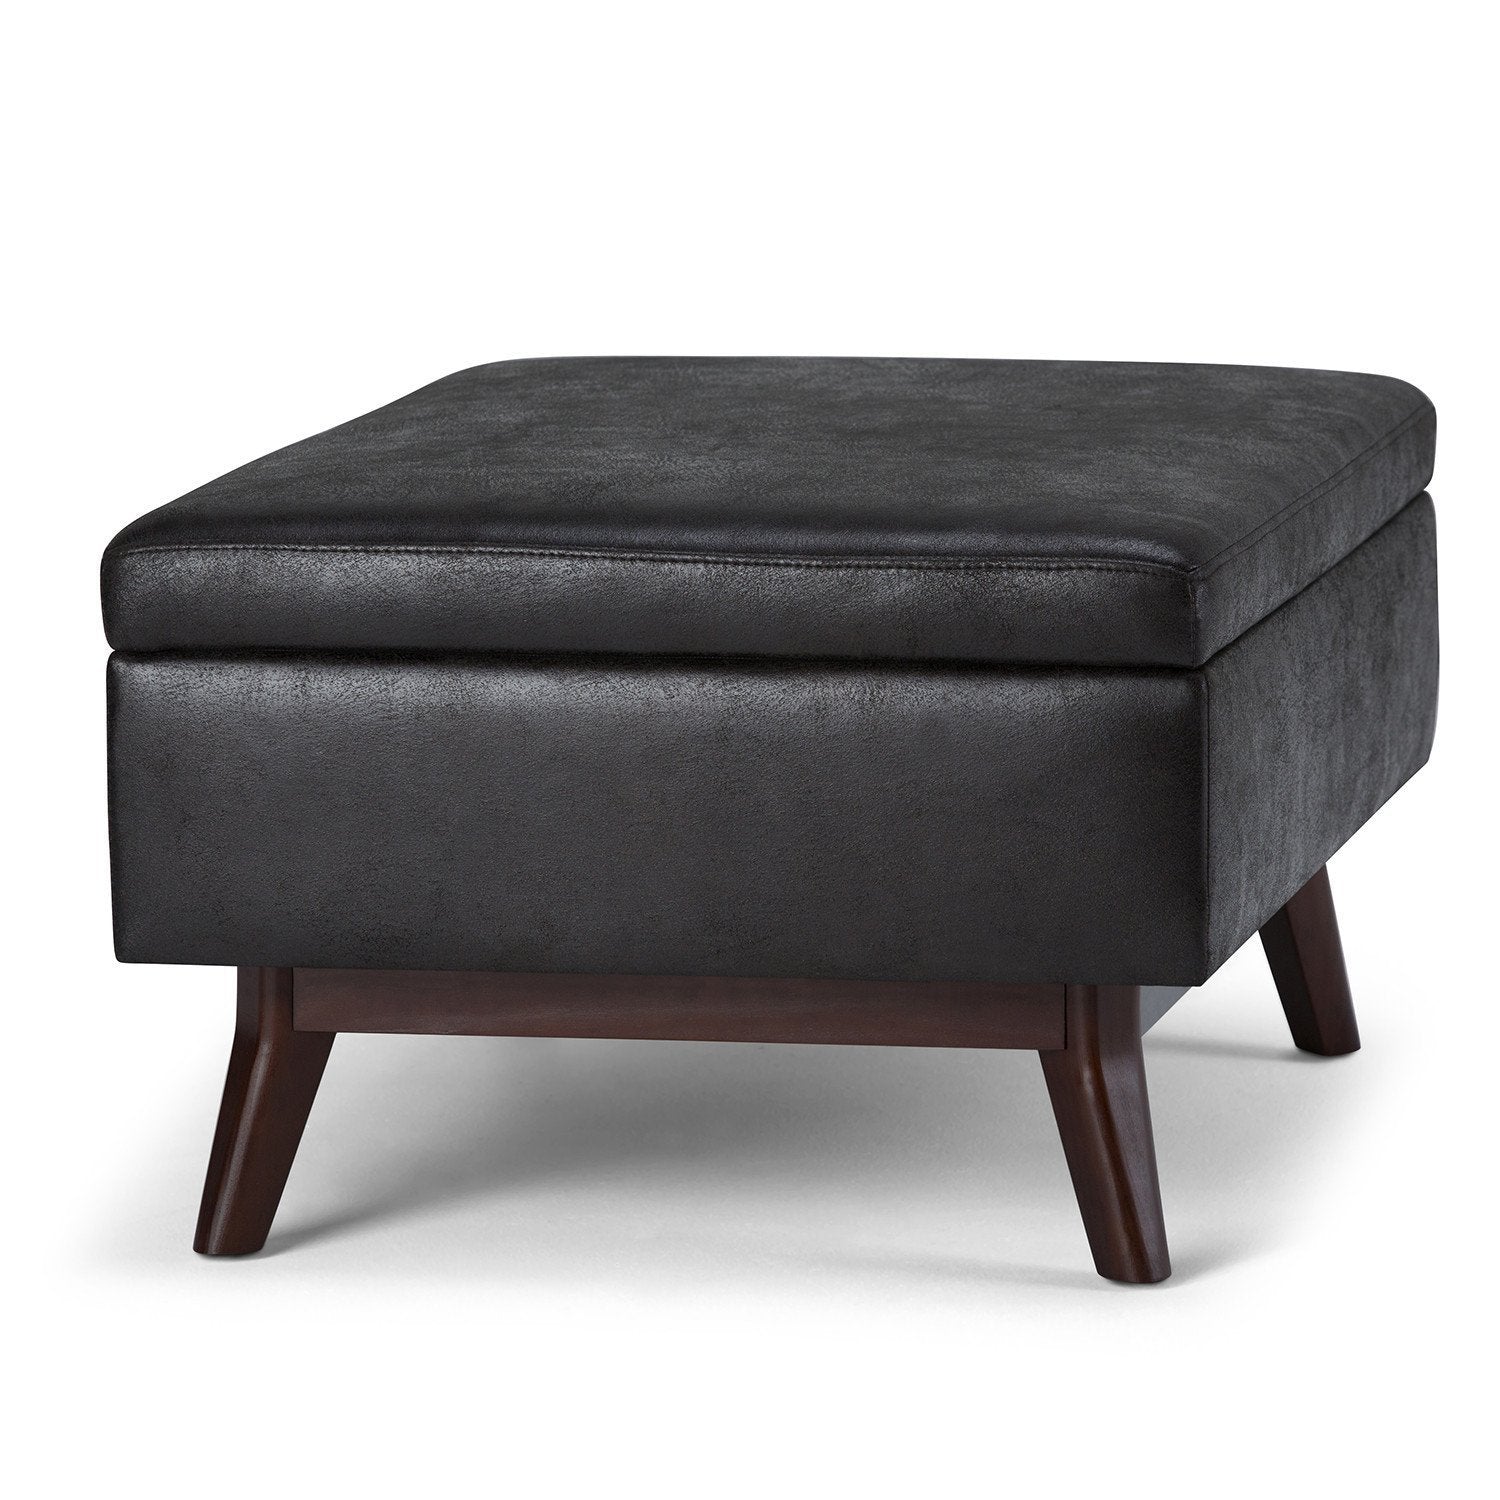 Distressed Black Distressed Vegan Leather | Owen Coffee Table Ottoman with Storage